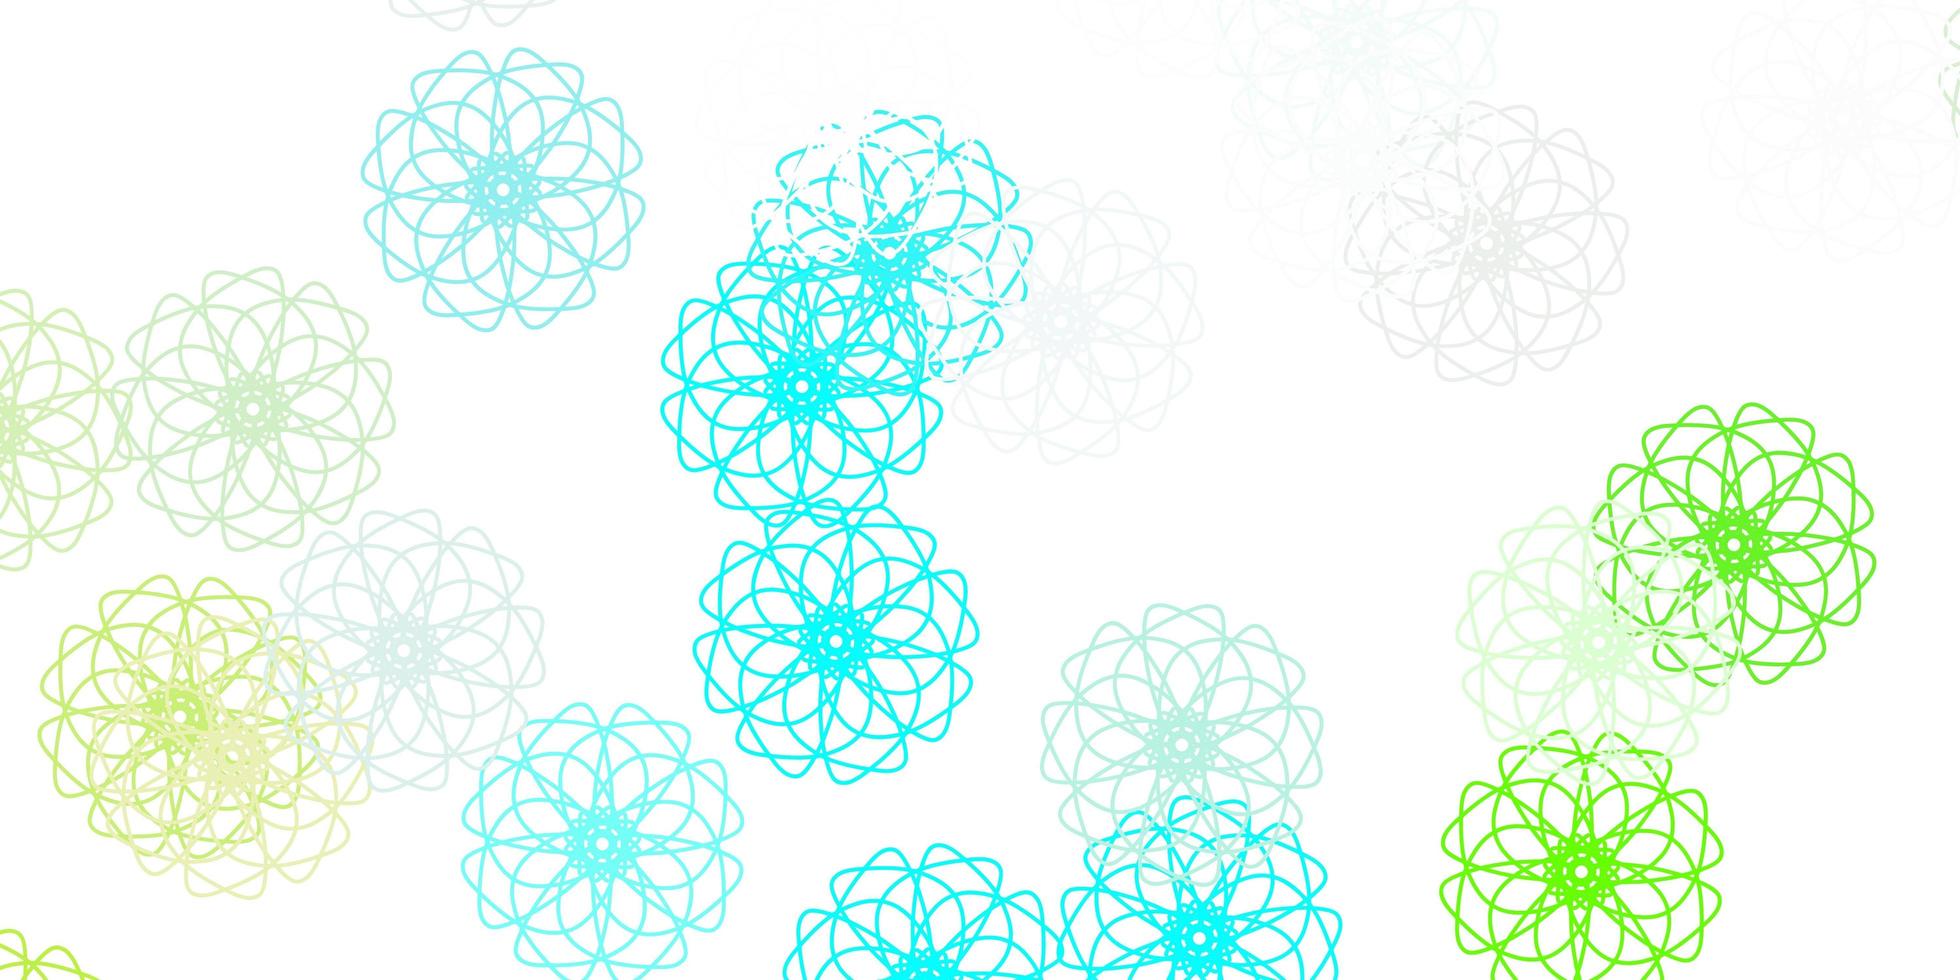 Light blue, green vector natural backdrop with flowers.